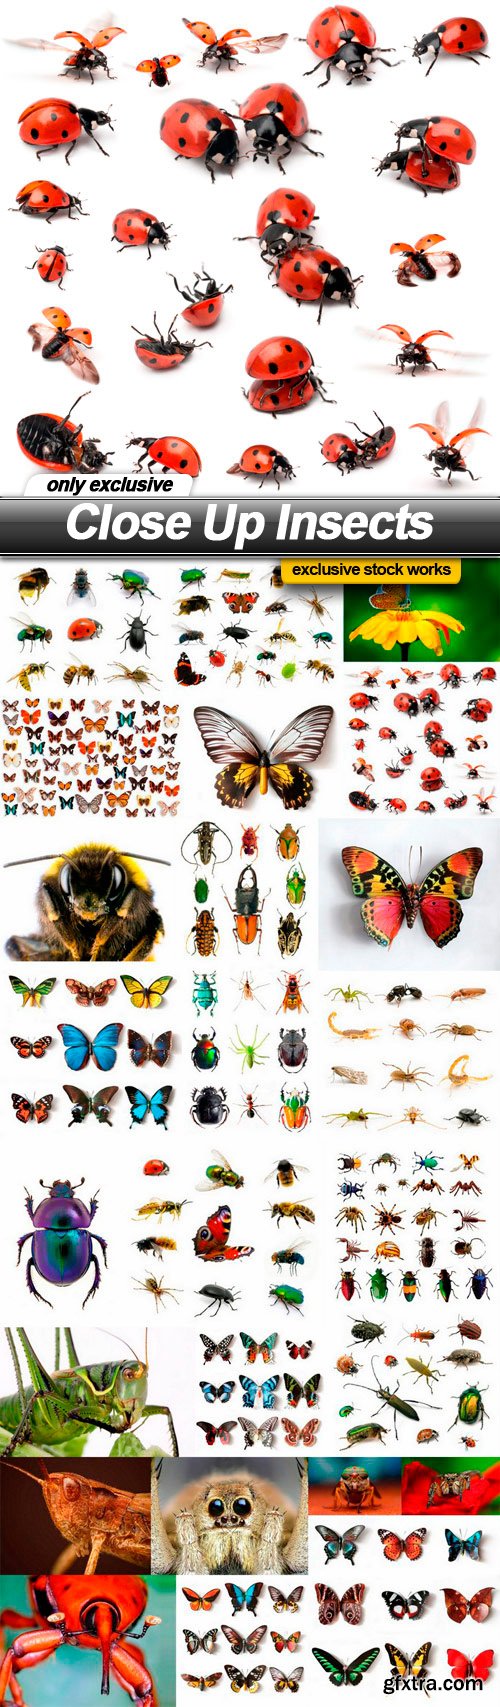 Close Up Insects - 25 UHQ JPEG